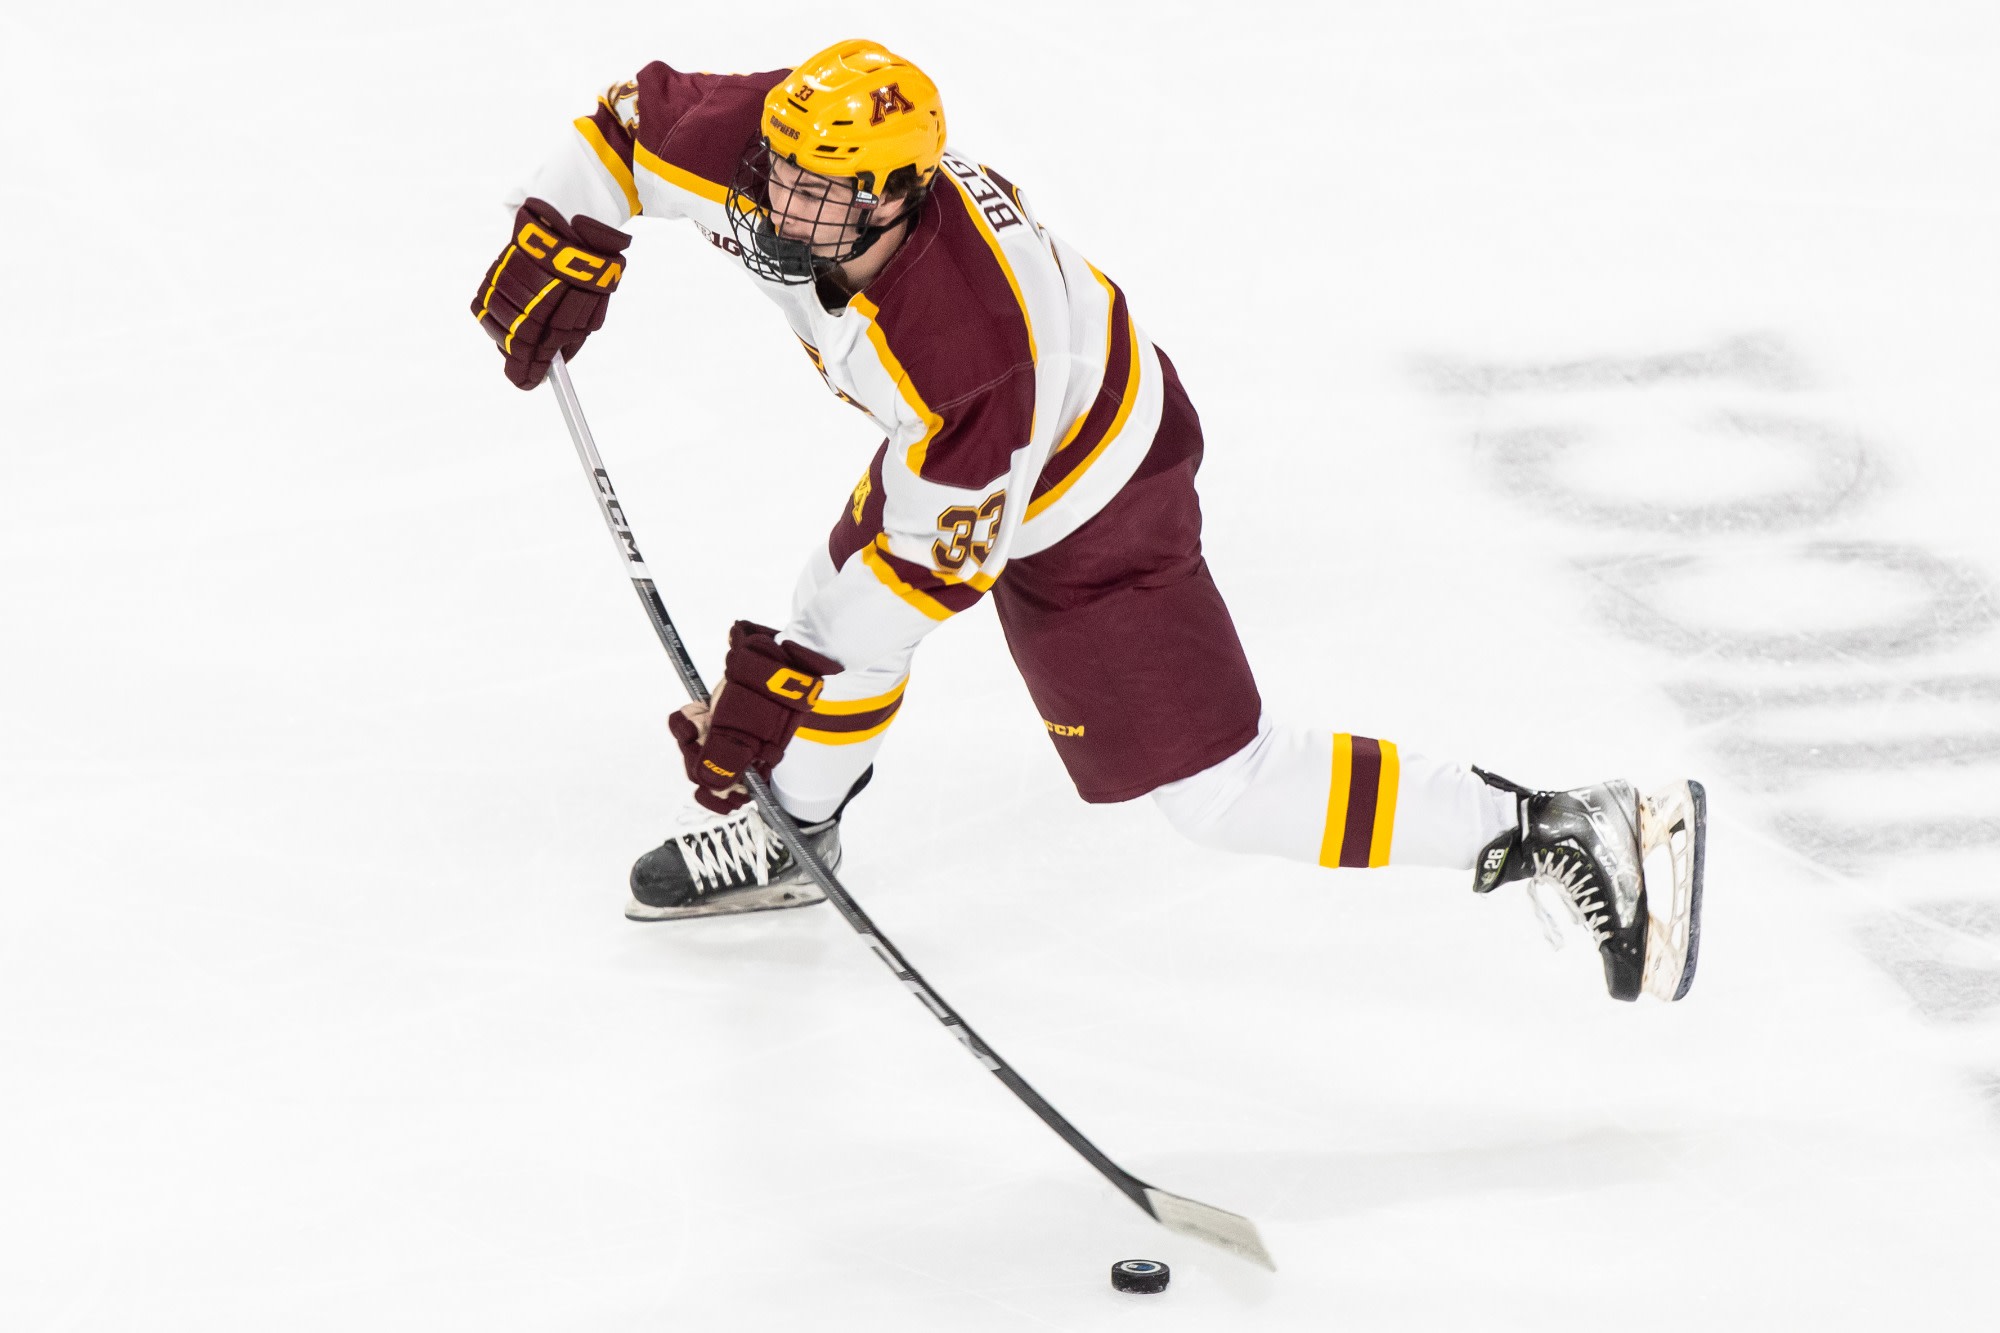 Somerby relishes goal, chance to skate in Frozen Four final for